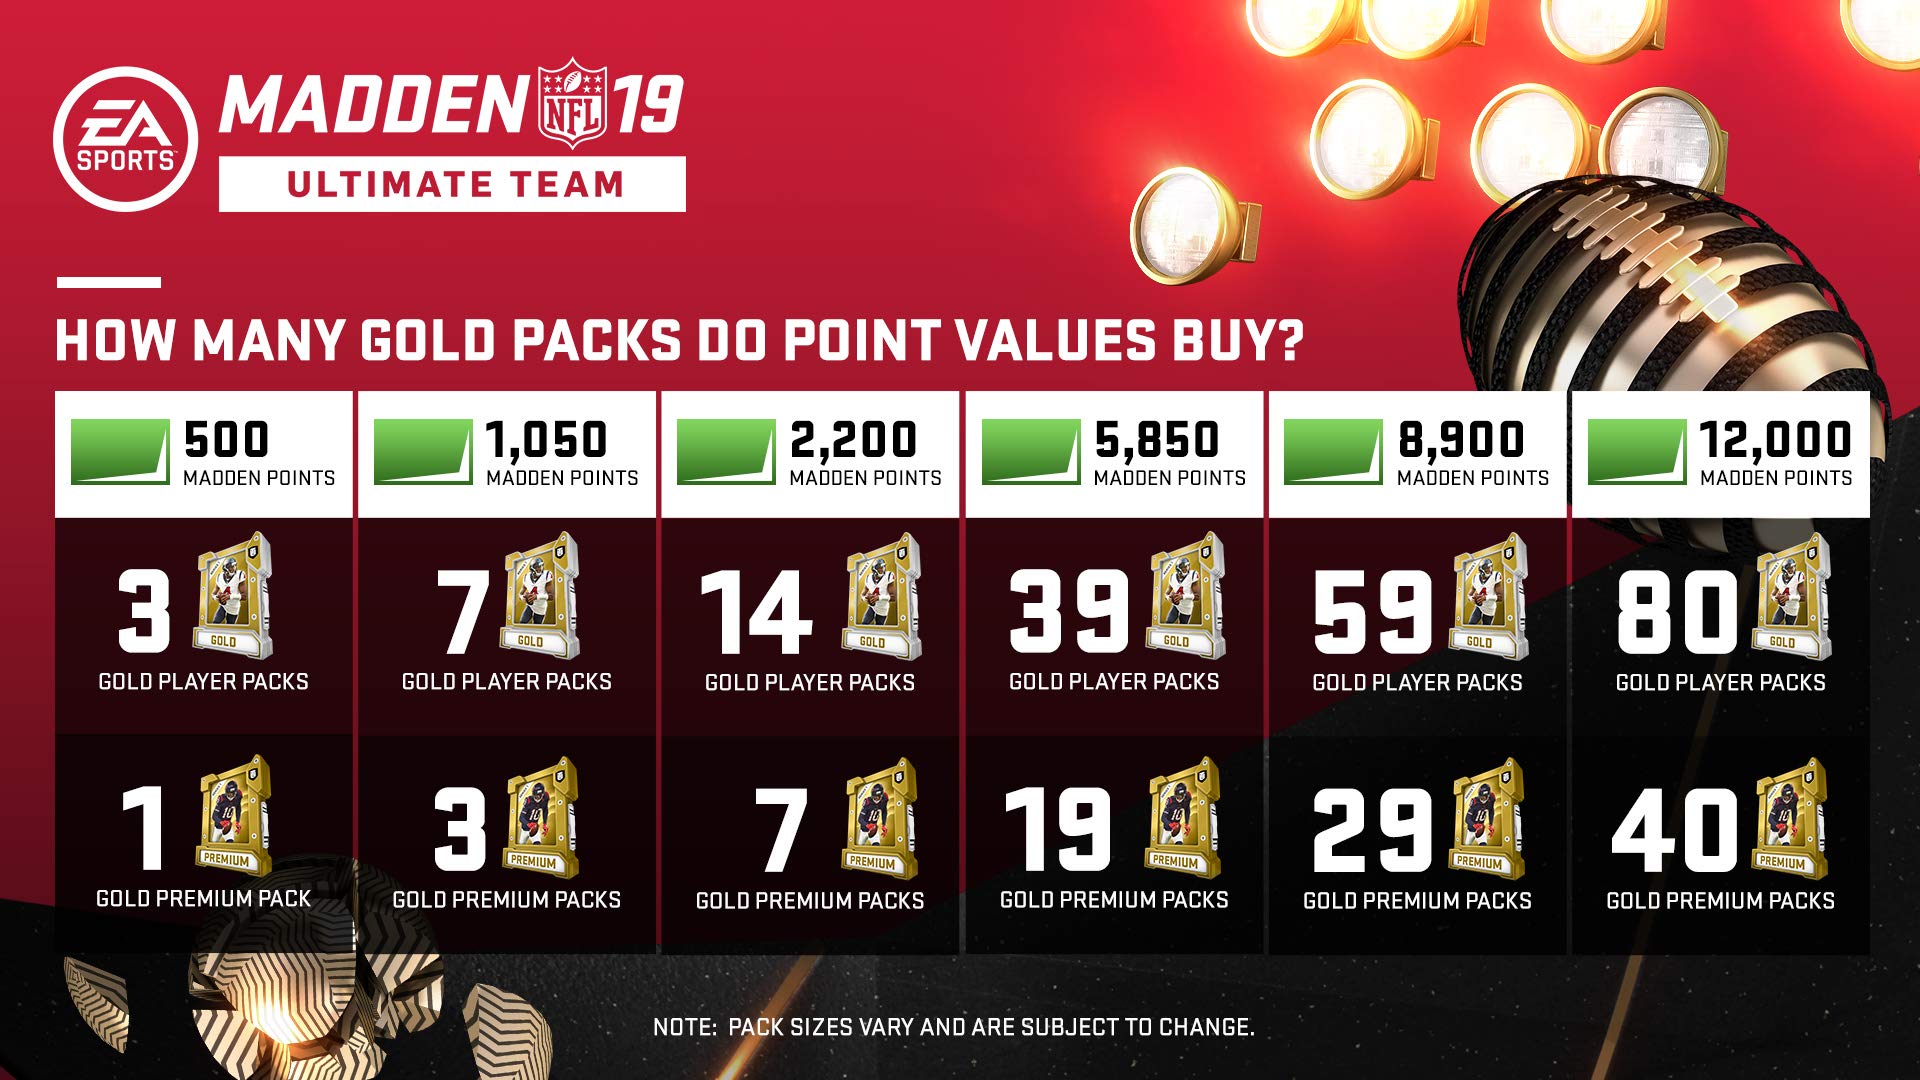 Madden 19 5850 Ultimate Team Points [Online Game Code]